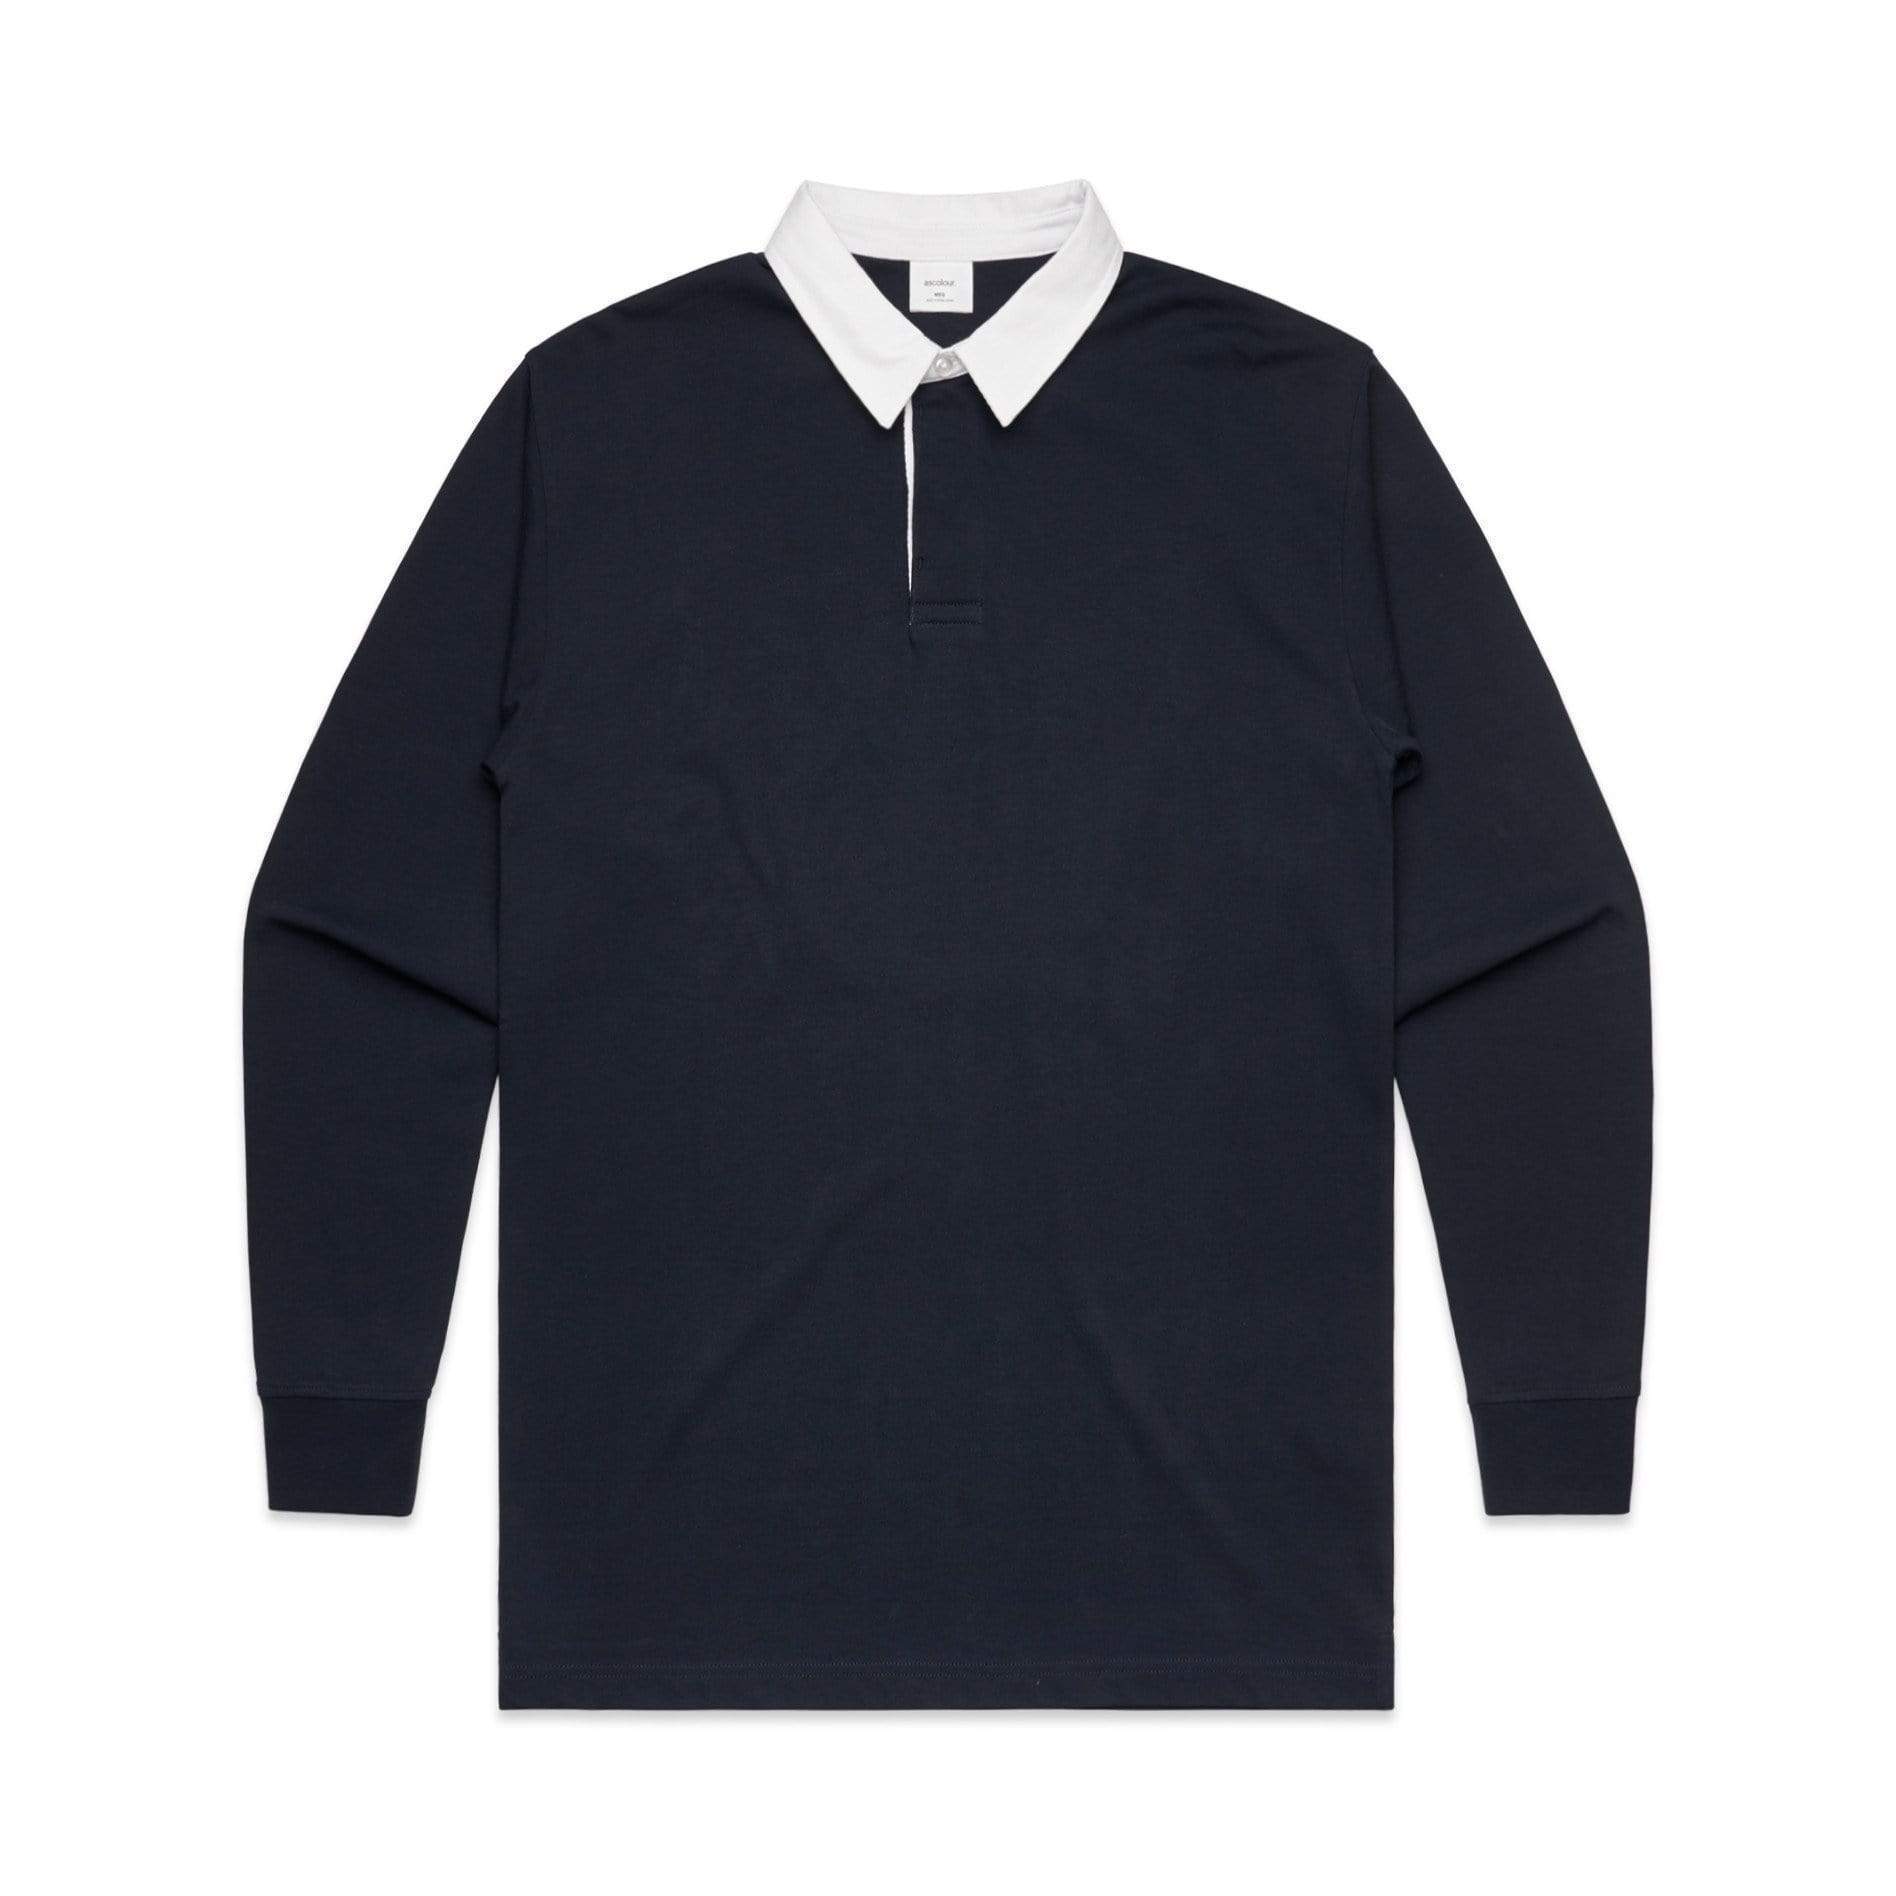 As Colour Men's rugby jersey 5410 Casual Wear As Colour NAVY XSM 